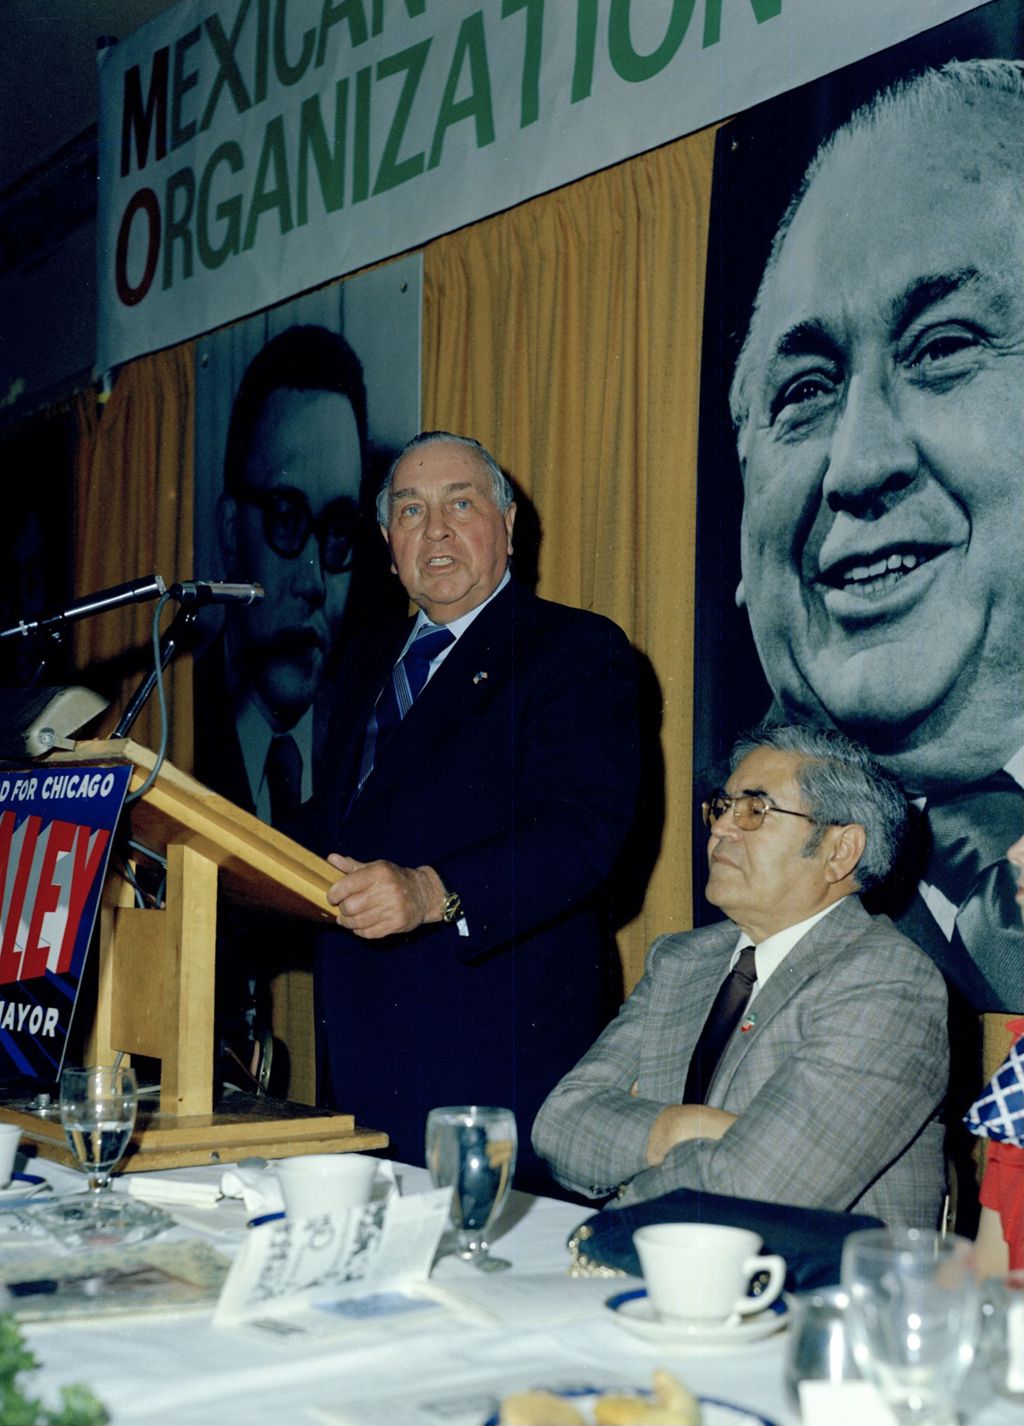 Miniature of Richard J. Daley speaking at Mexican American Democratic Organization of Cook County banquet